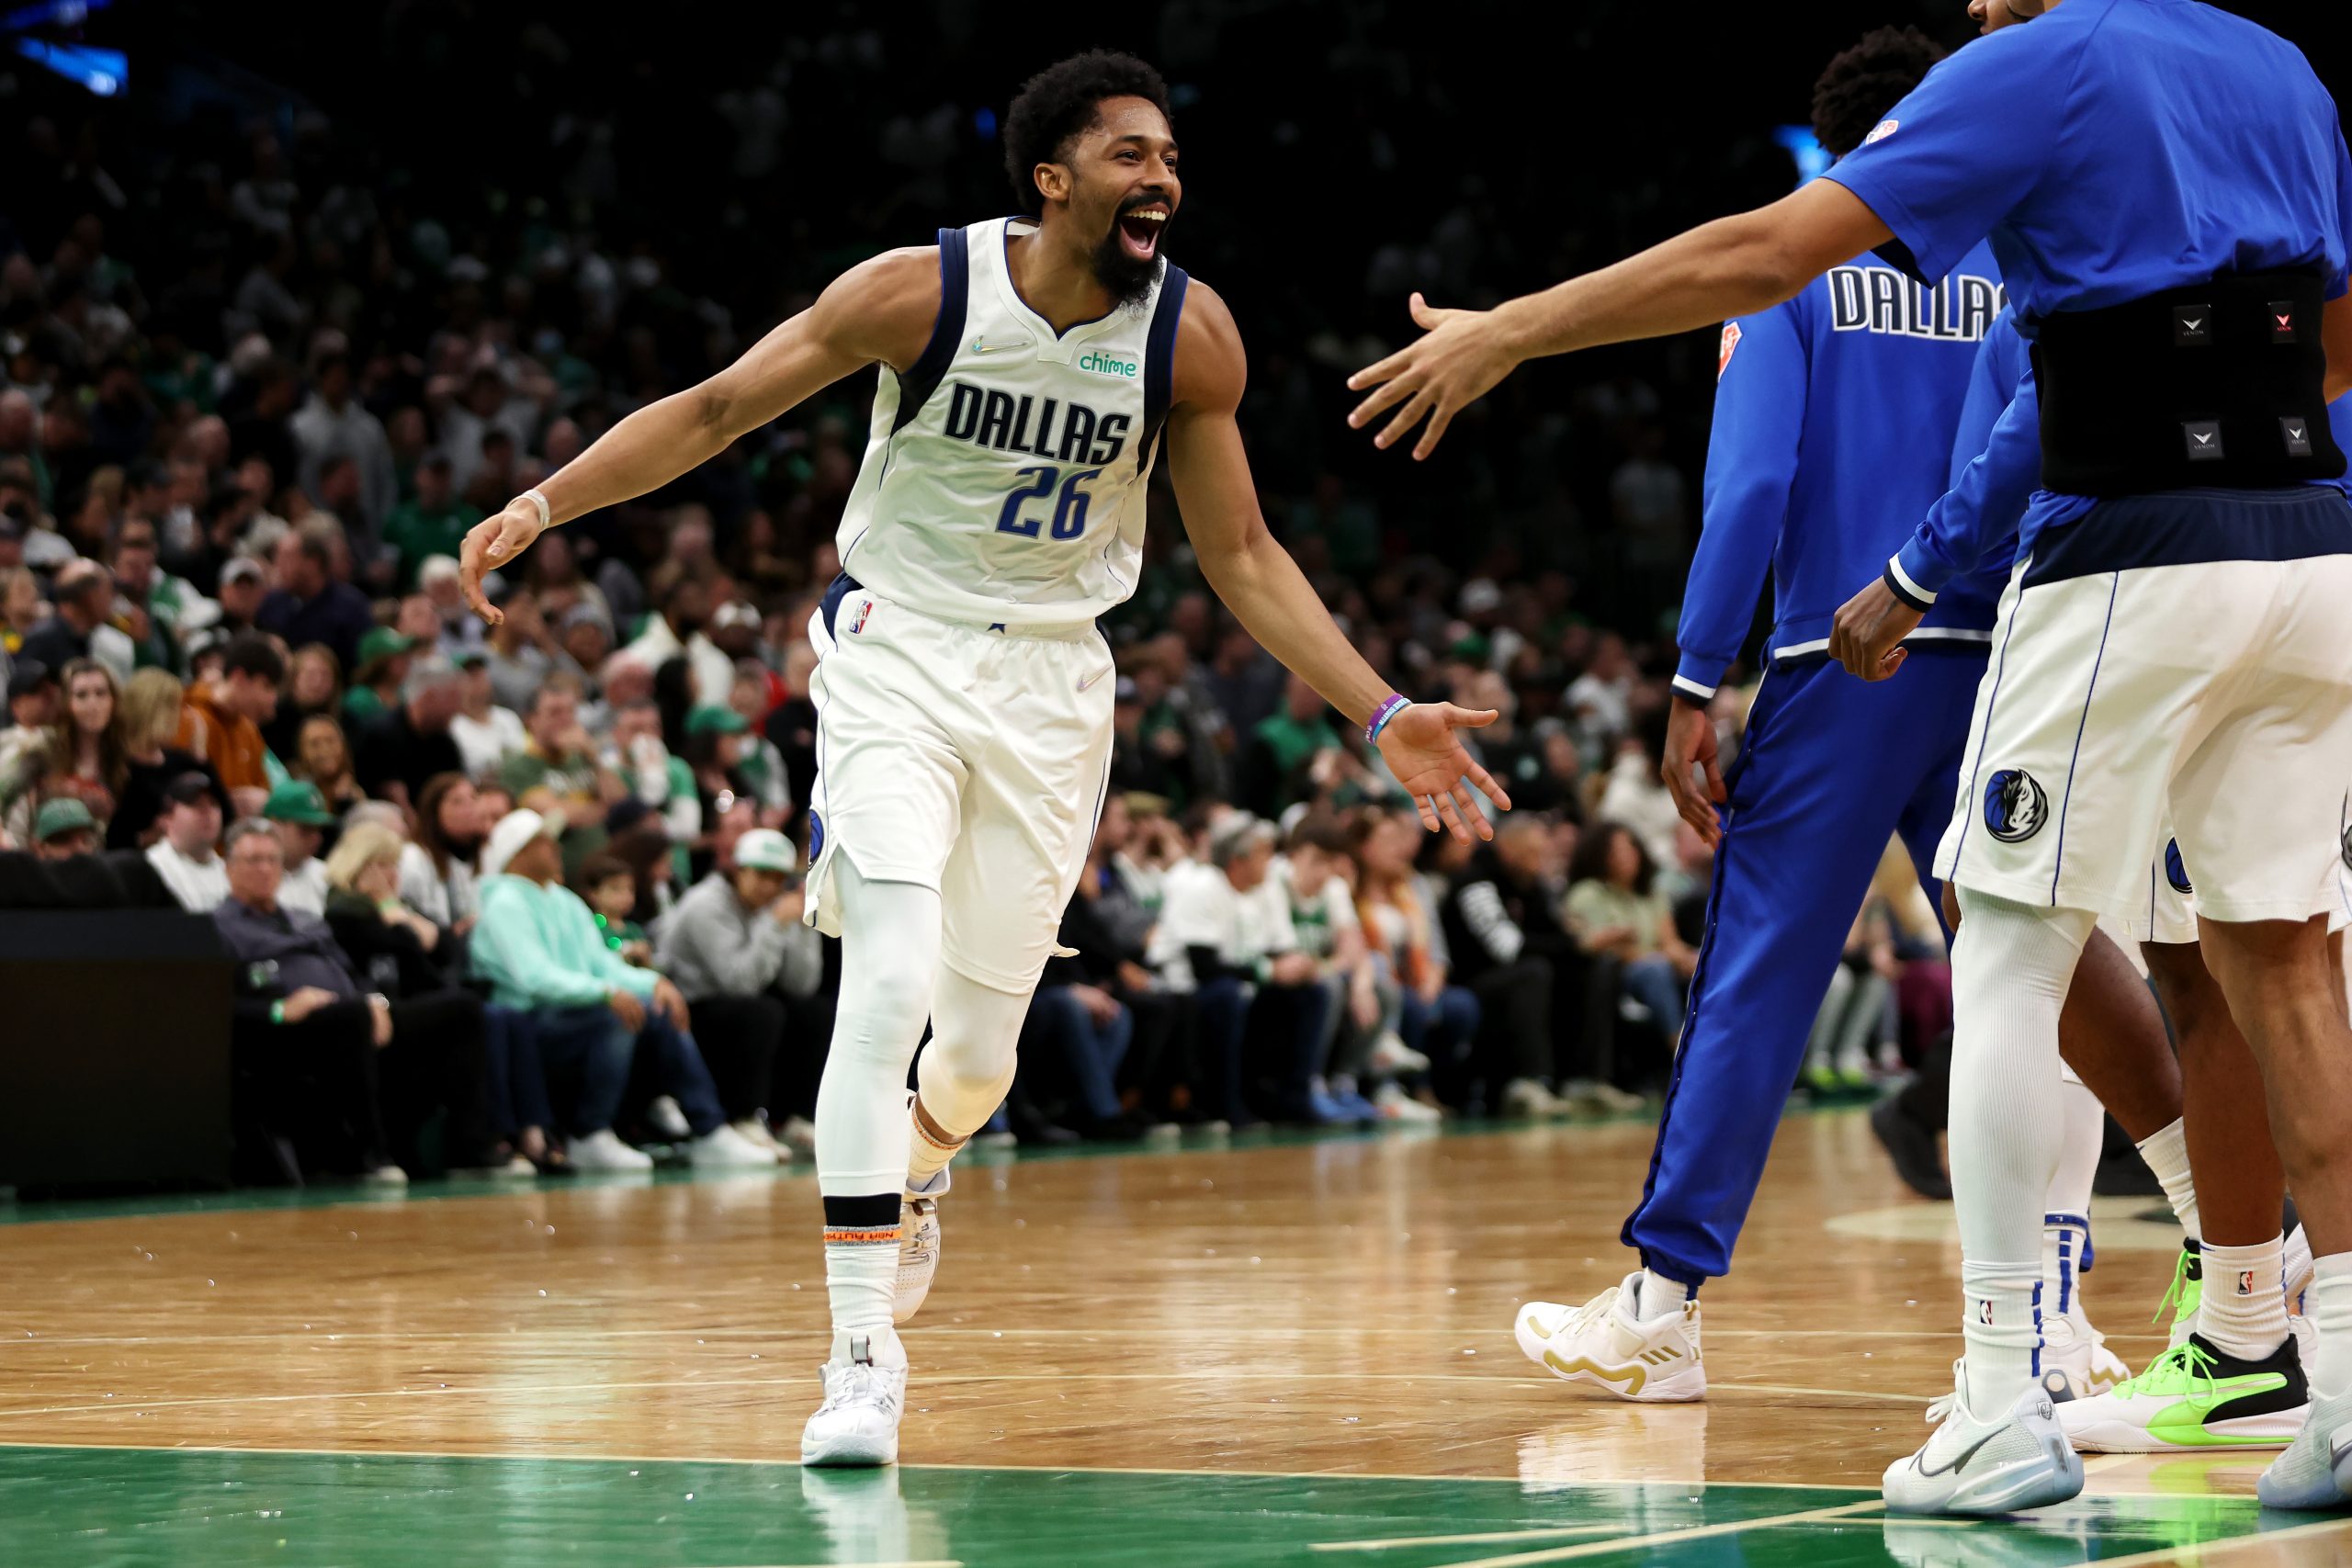 Basketball Forever on X: Spencer Dinwiddie and the Washington